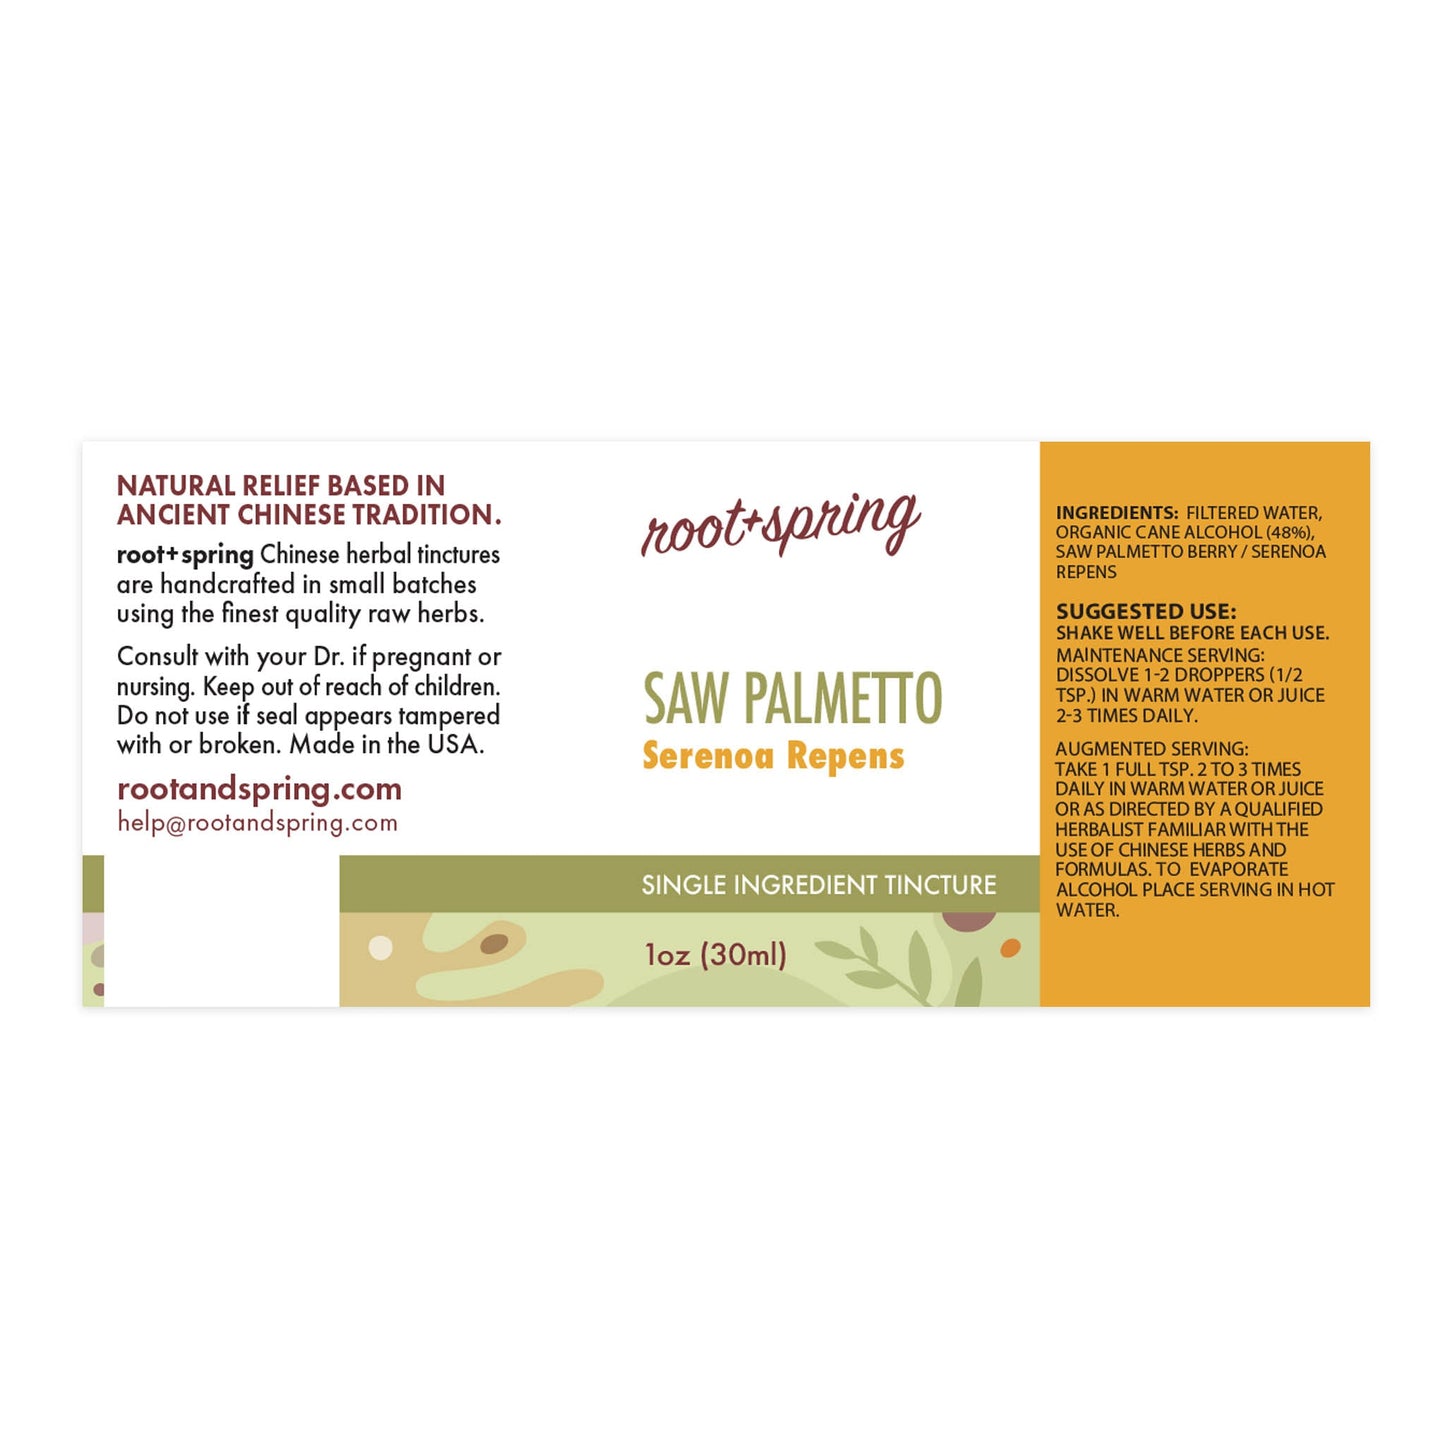 Label for Saw Palmetto, Serenoa Repens Herbal Tincture by root + spring